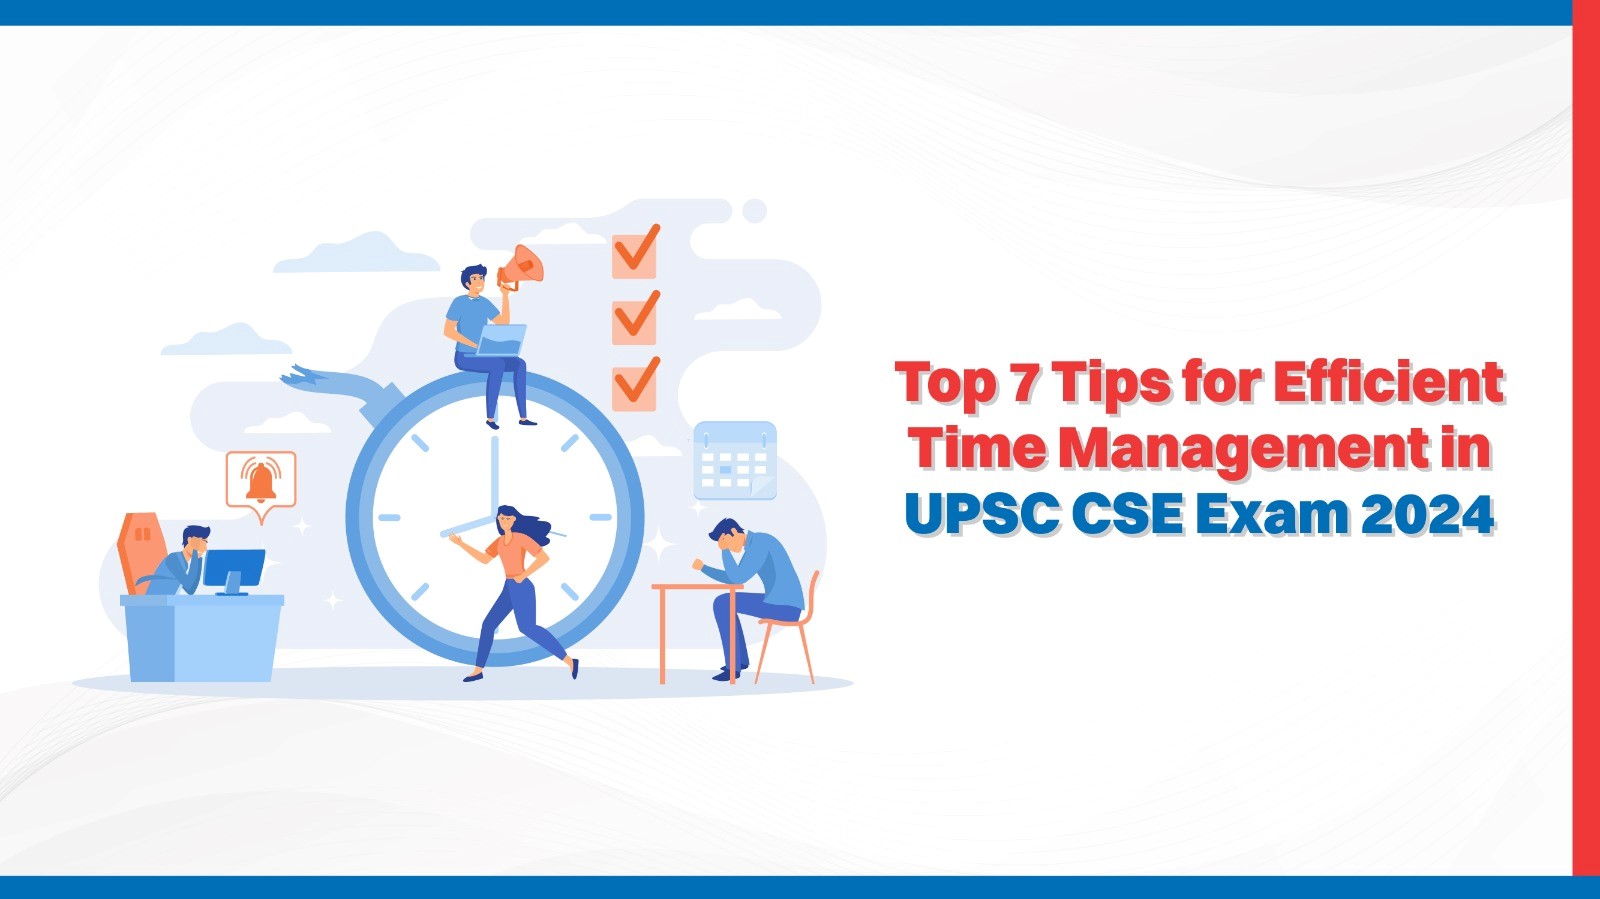 Top 7 Tips for Efficient Time Management in UPSC CSE Exam 2024.jpg